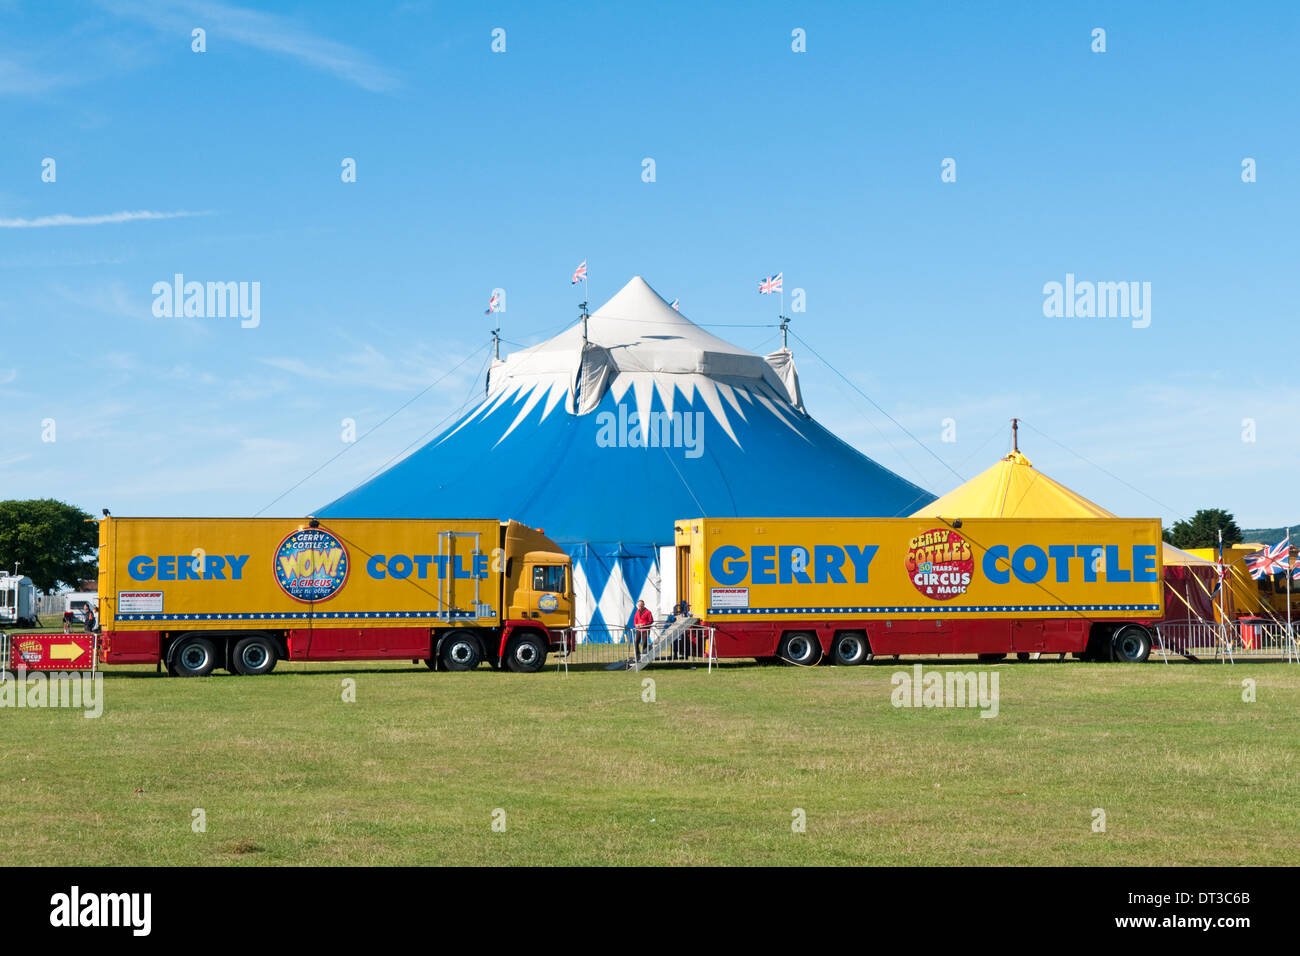 Gerry Cottle transport truck and trailer in front of a circus big top tent Stock Photo